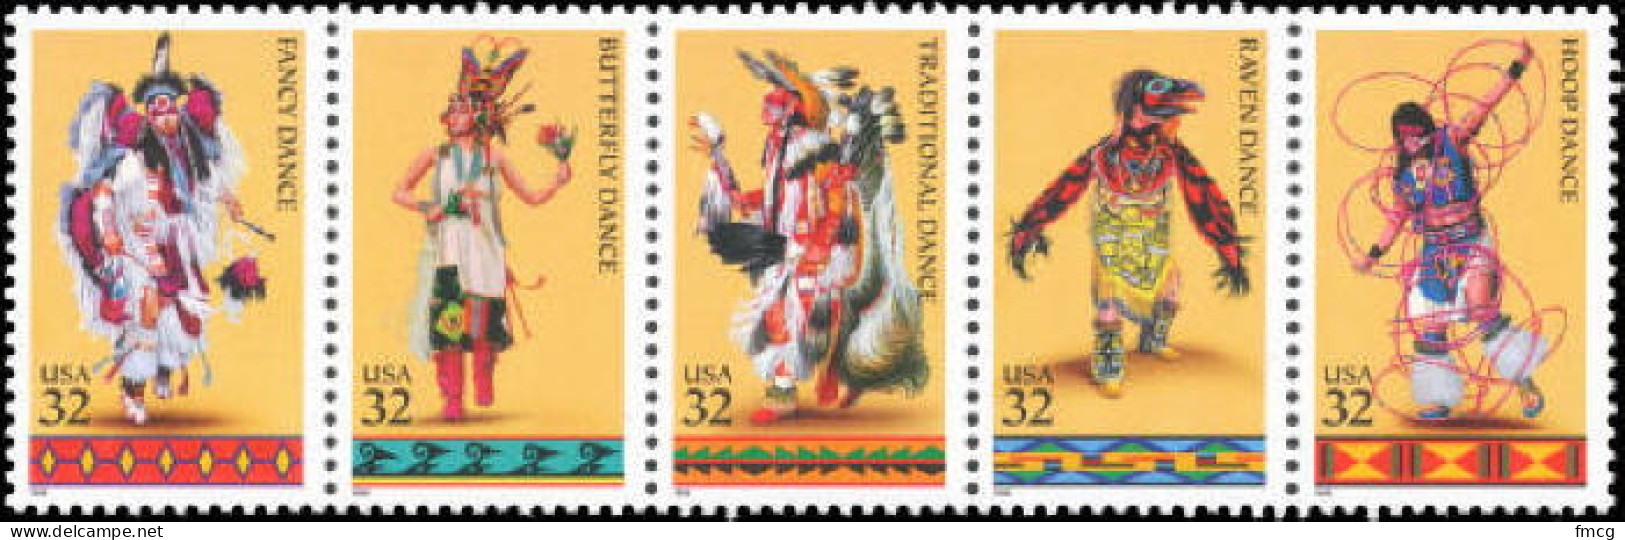 1996 32 Cents Indian Dances, Strip Of 5, MNH - Unused Stamps